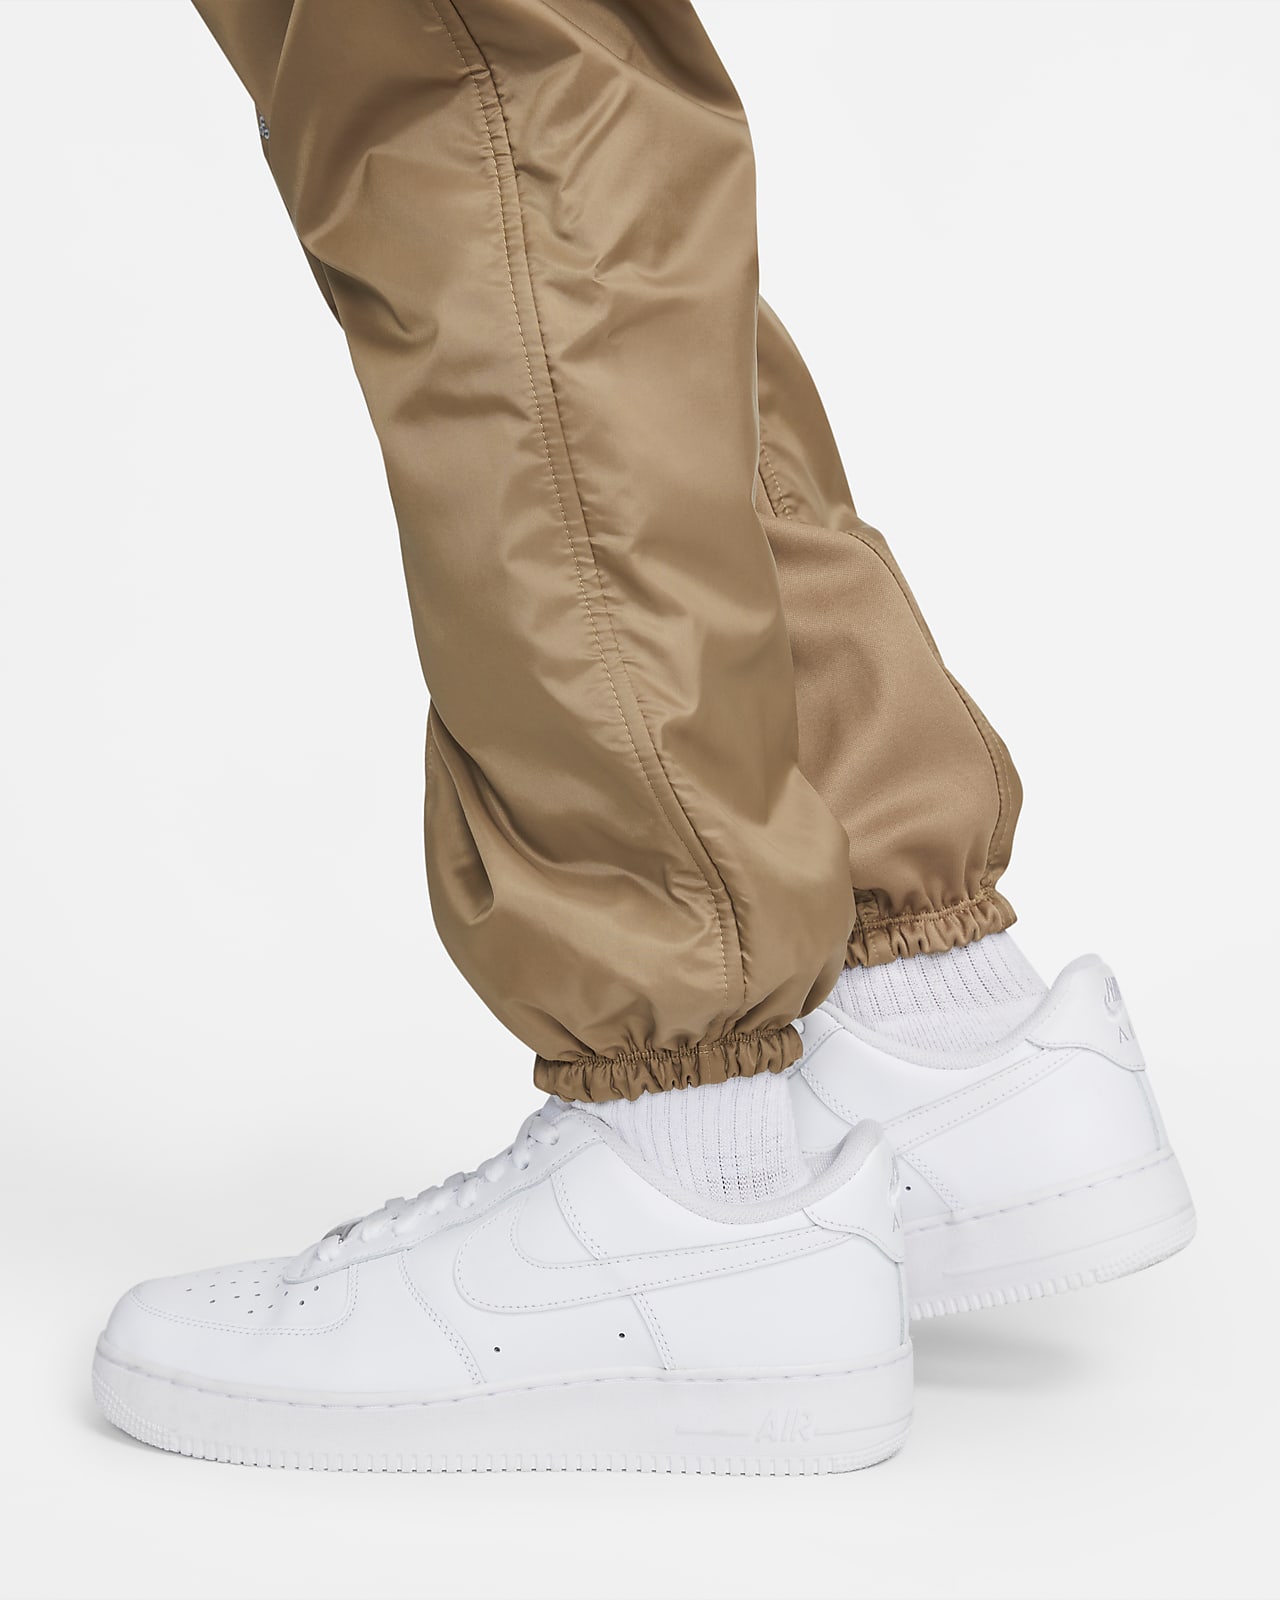 Nike Therma-FIT Standard Issue Men's Winterized Basketball Trousers ...